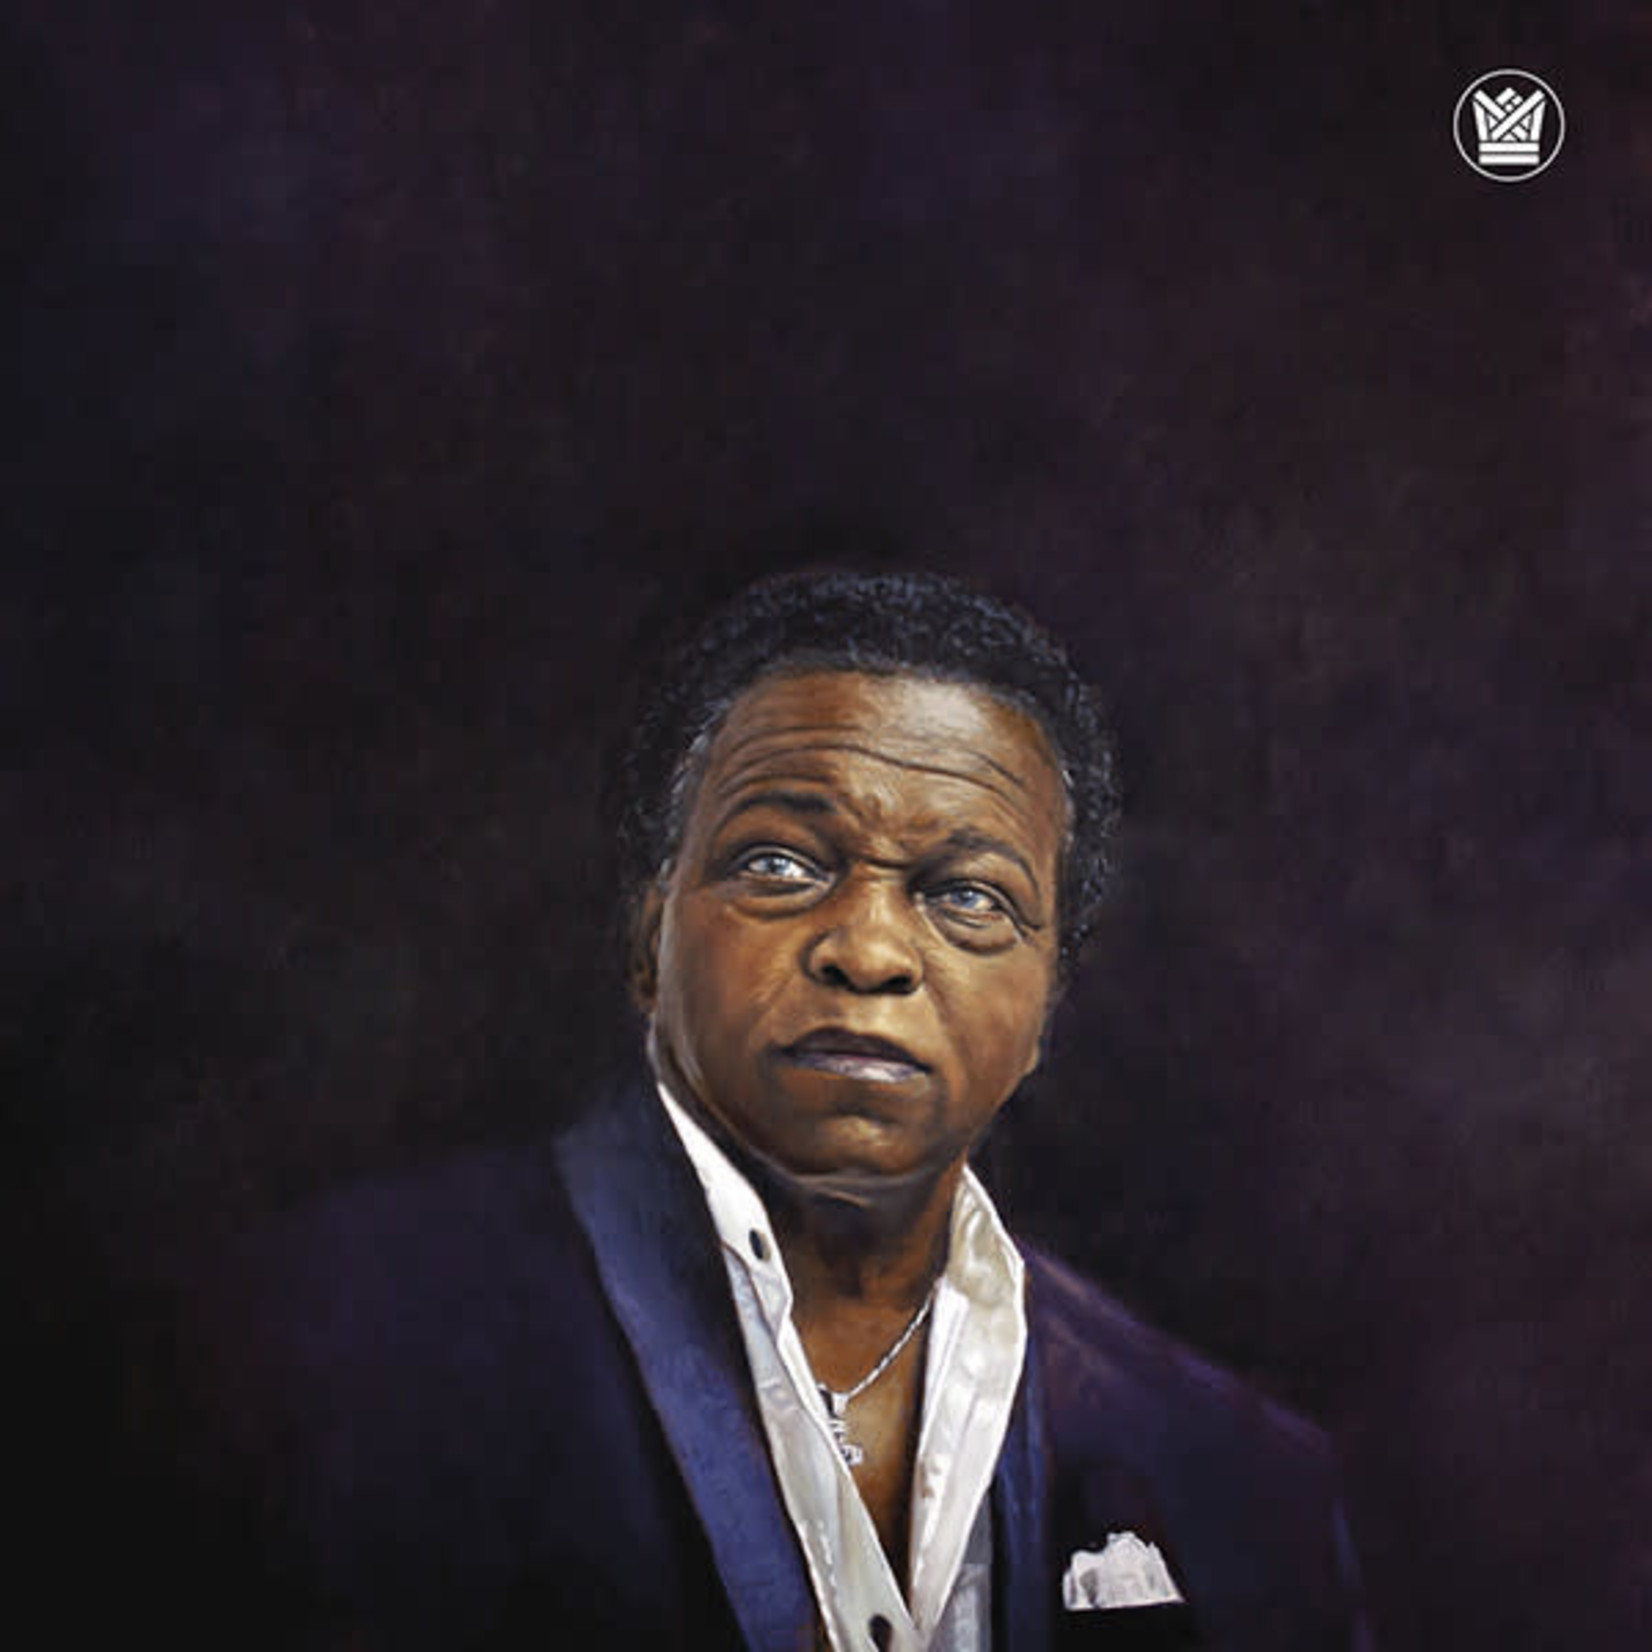 [New] Lee Fields & The Expressions - Big Crown Vaults Vol. 1 (lavender swirl opaque vinyl)